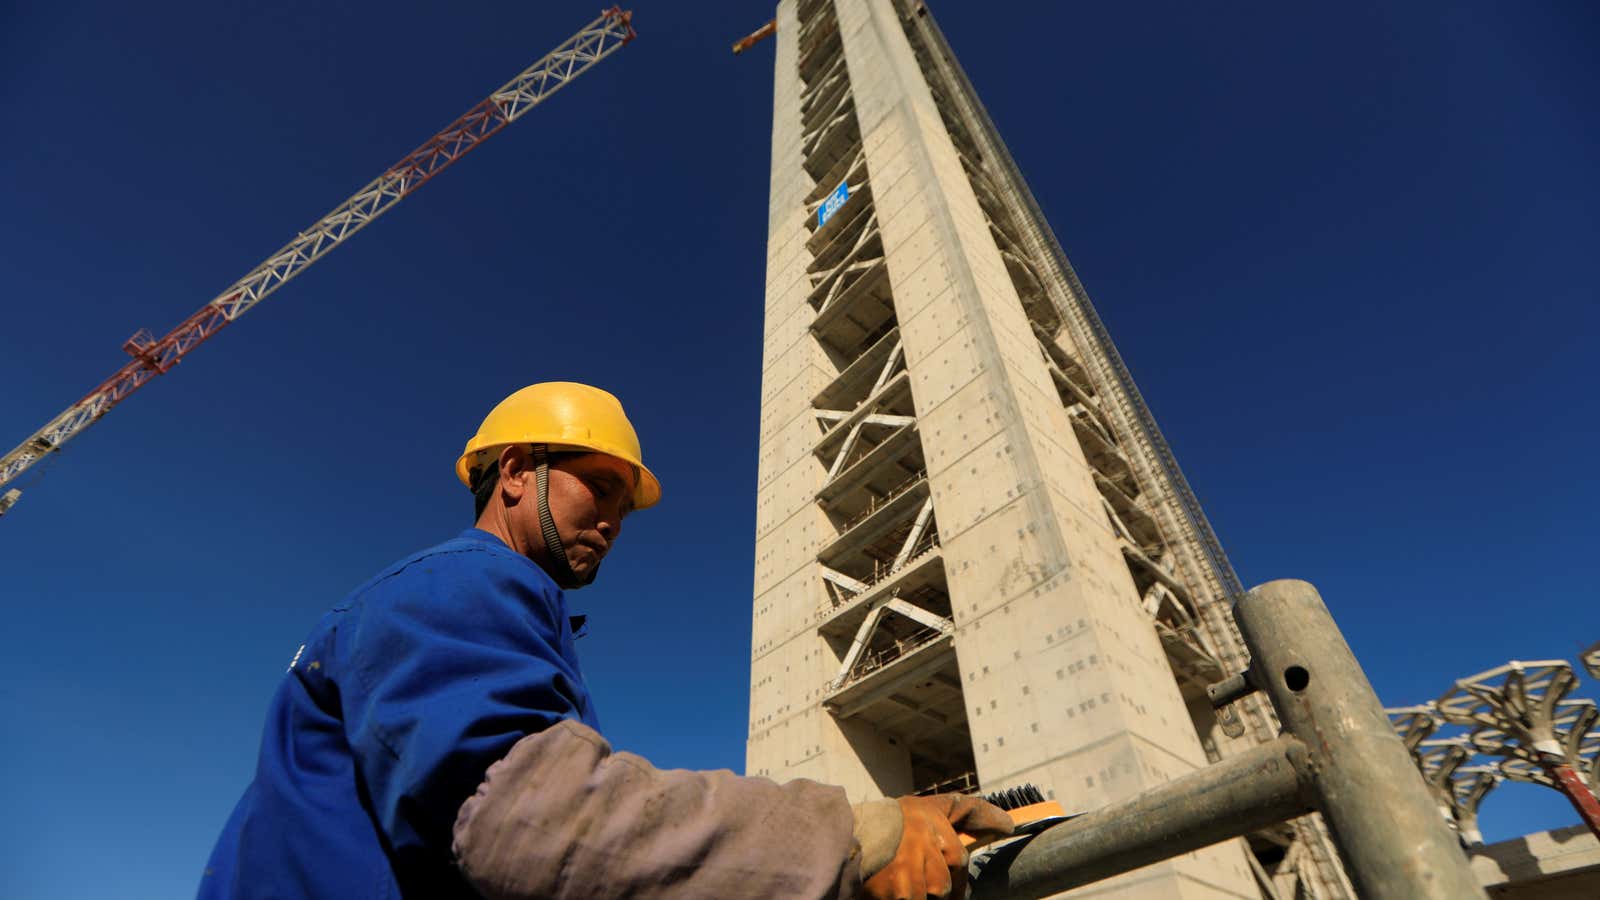 A Chinese worker is seen below the 270-meter-high minaret at the construction site of the new Great Mosque of Algiers, built by the China State Construction Engineering Corporation (CSCEC) in Algiers, Algeria. Feb. 7 2017